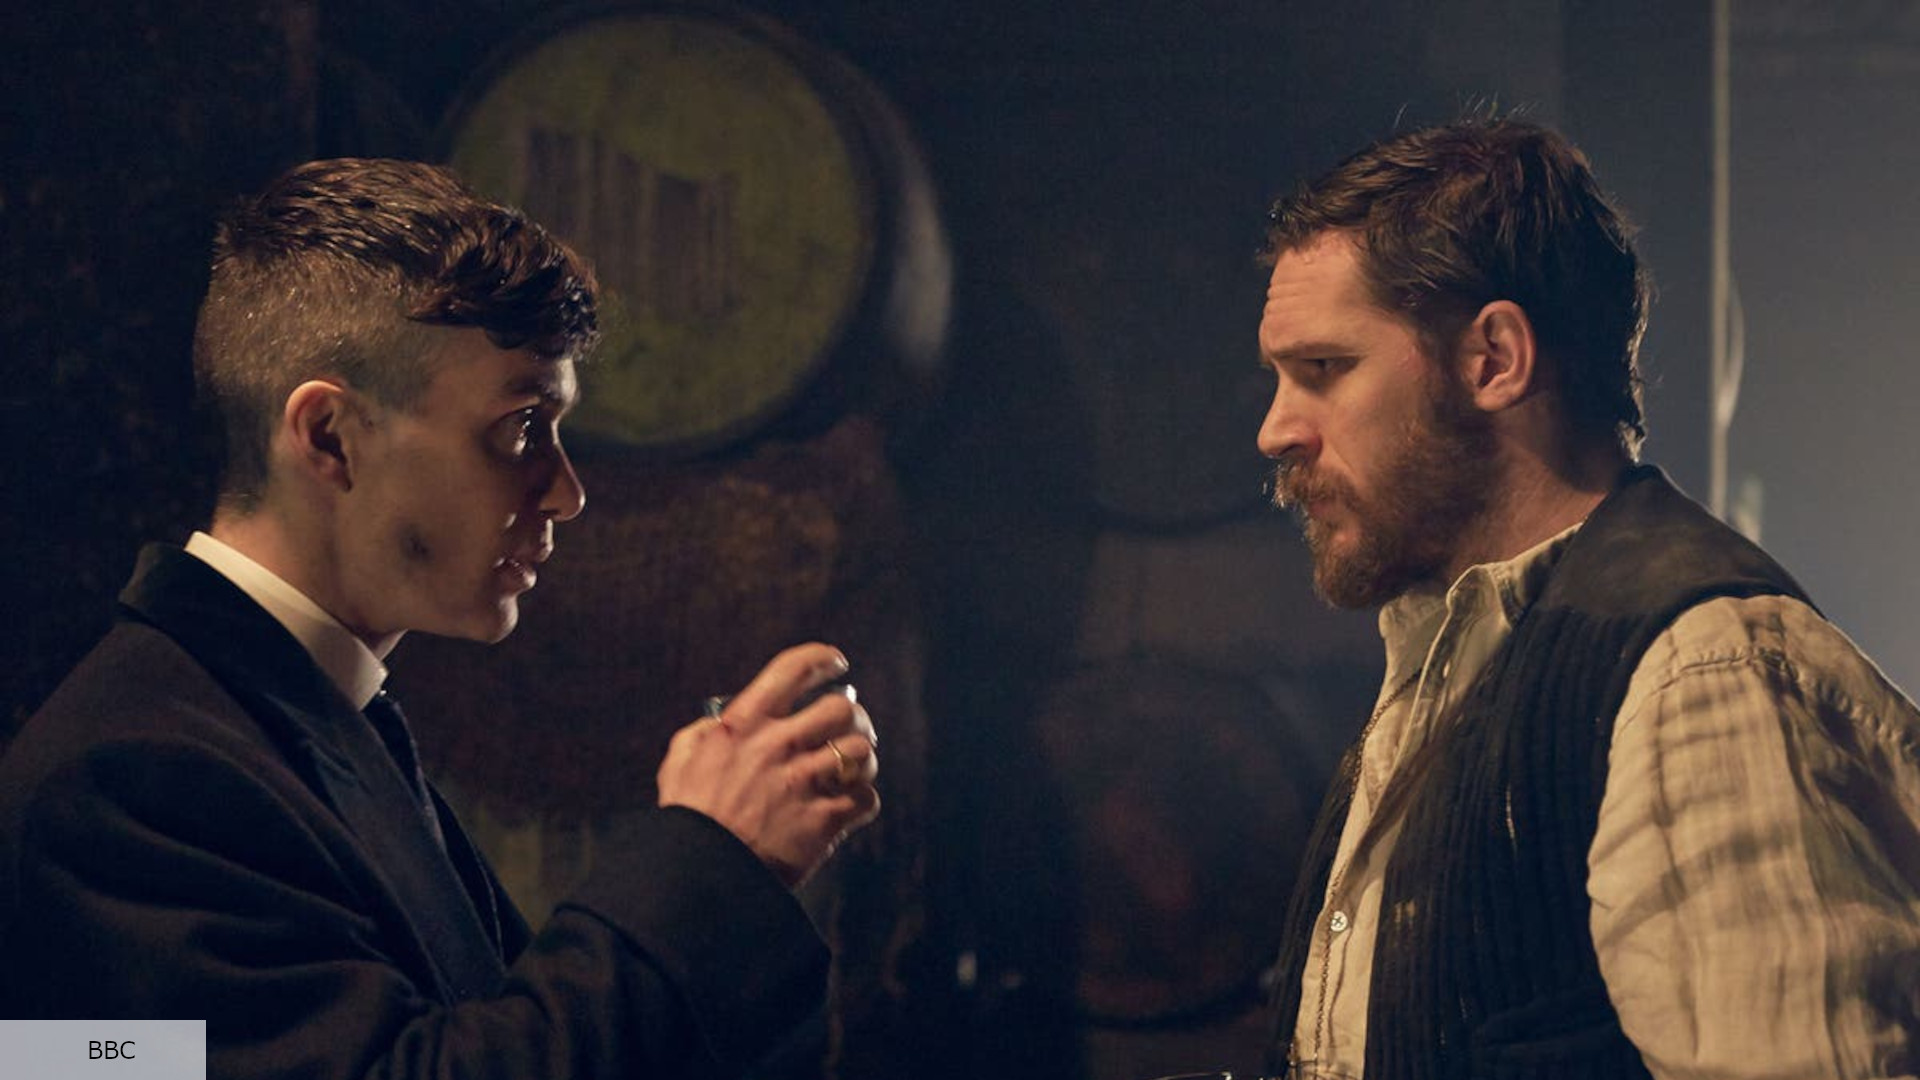 How Much Money Does Alfie Solomons Have?